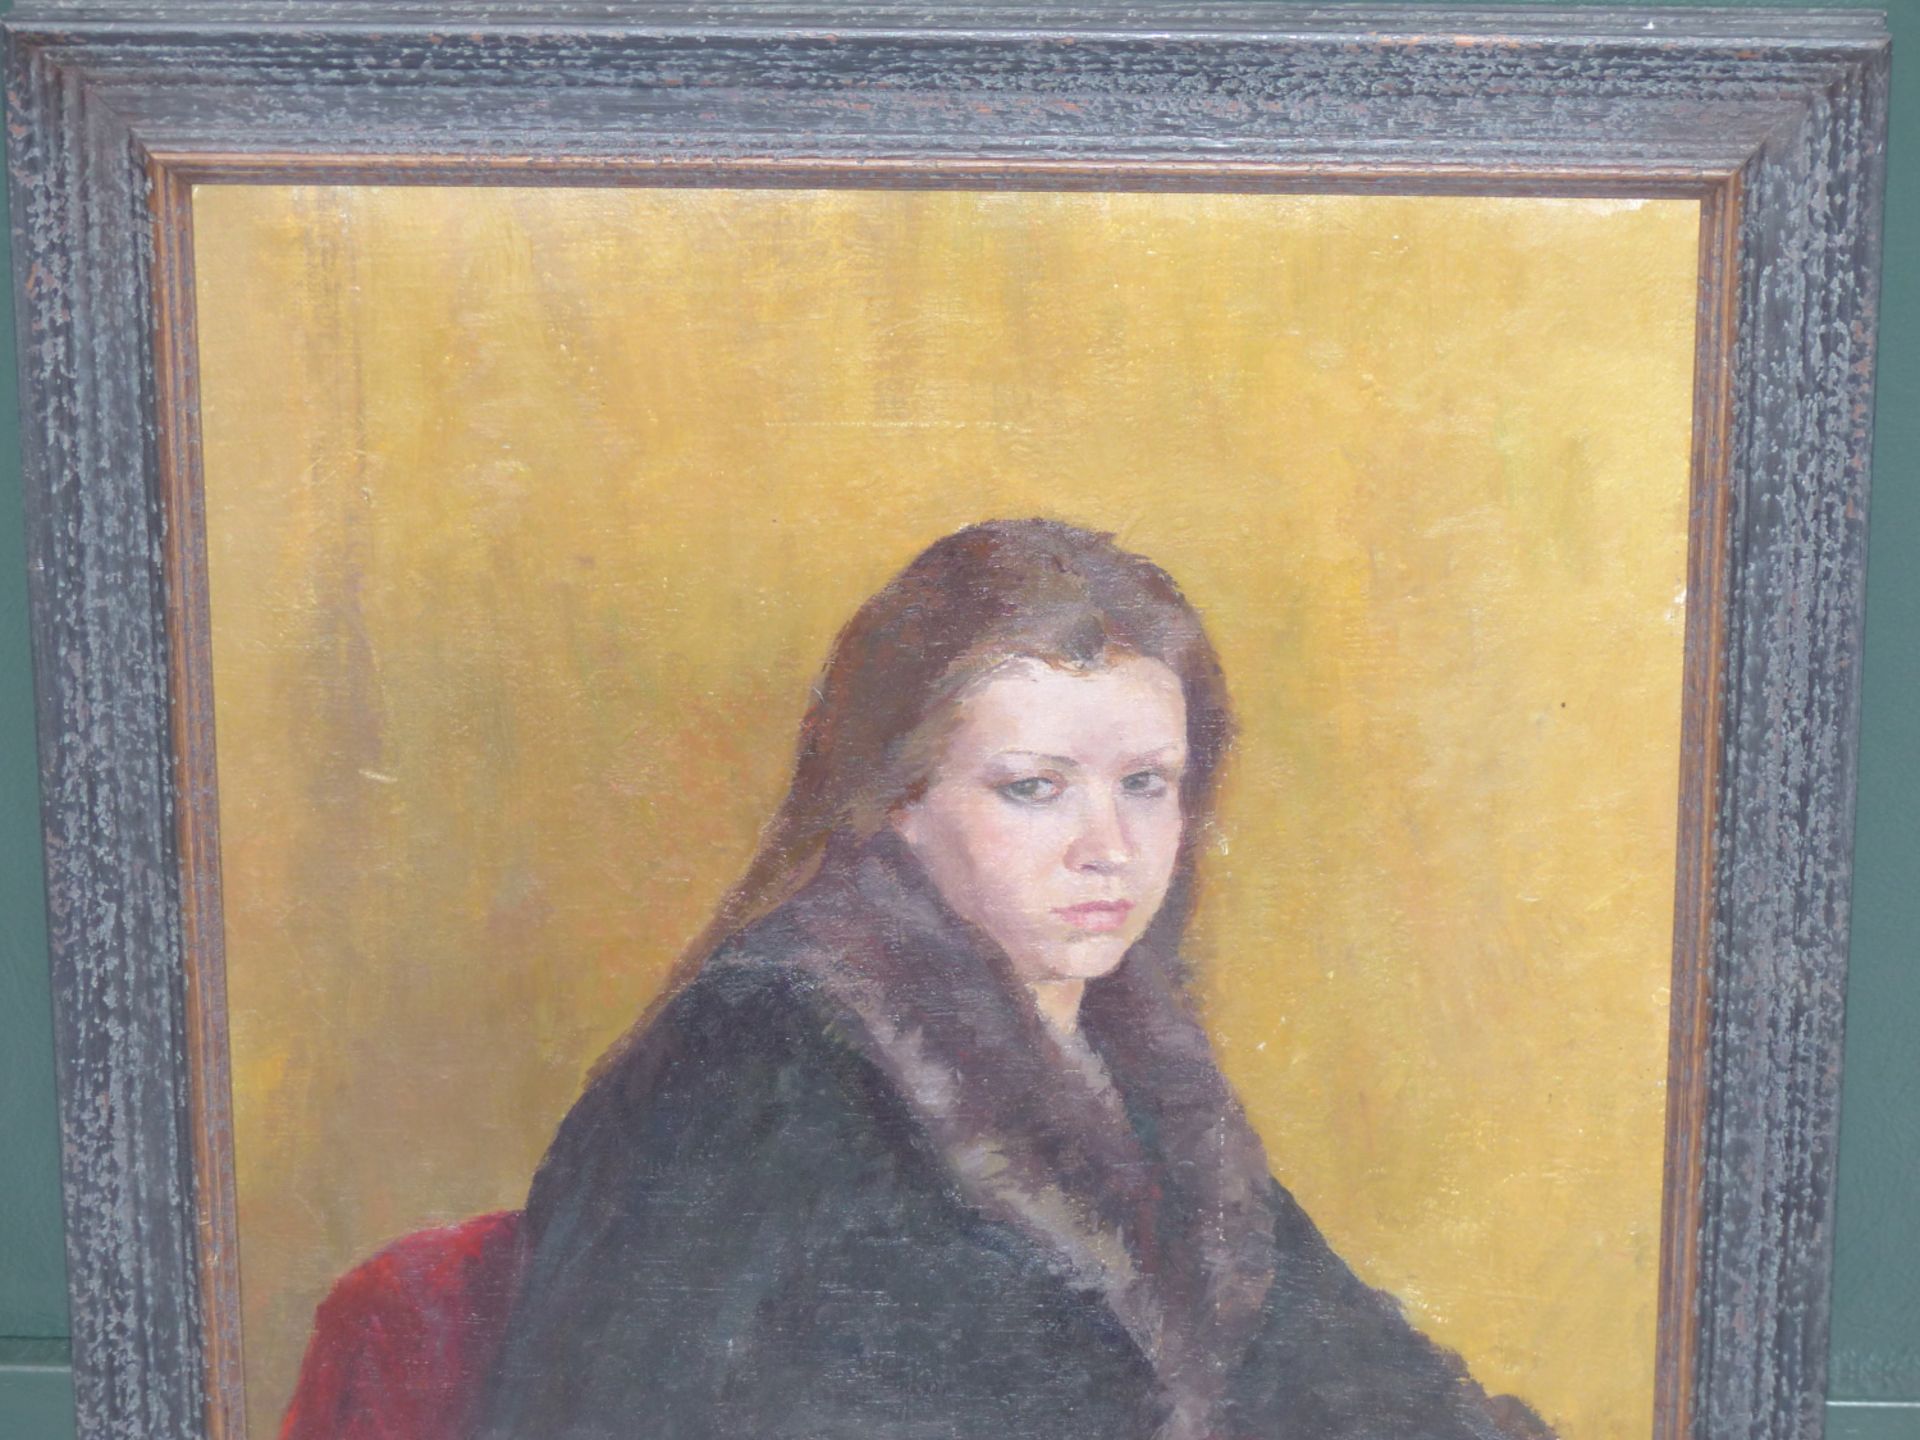 20TH CENTURY SCHOOL, PORTRAIT OF A YOUNG LADY WITH FUR COLLARED COAT, OIL ON CANVAS, 39 X 49 cm. - Image 6 of 7